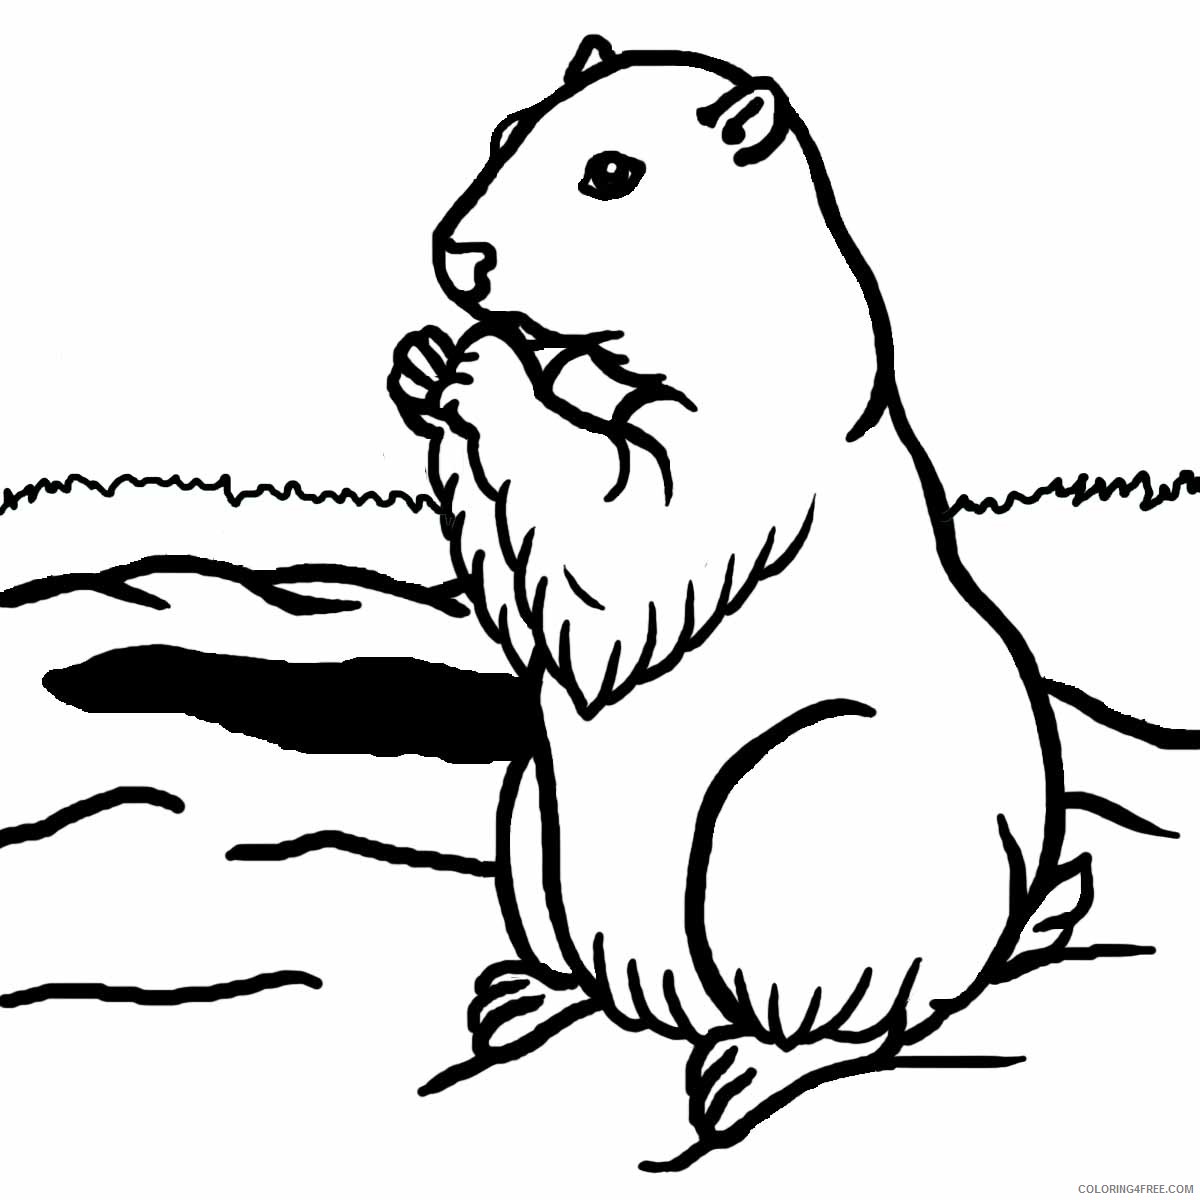 Groundhog Coloring Pages groundhog day clipart Printable Coloring4free